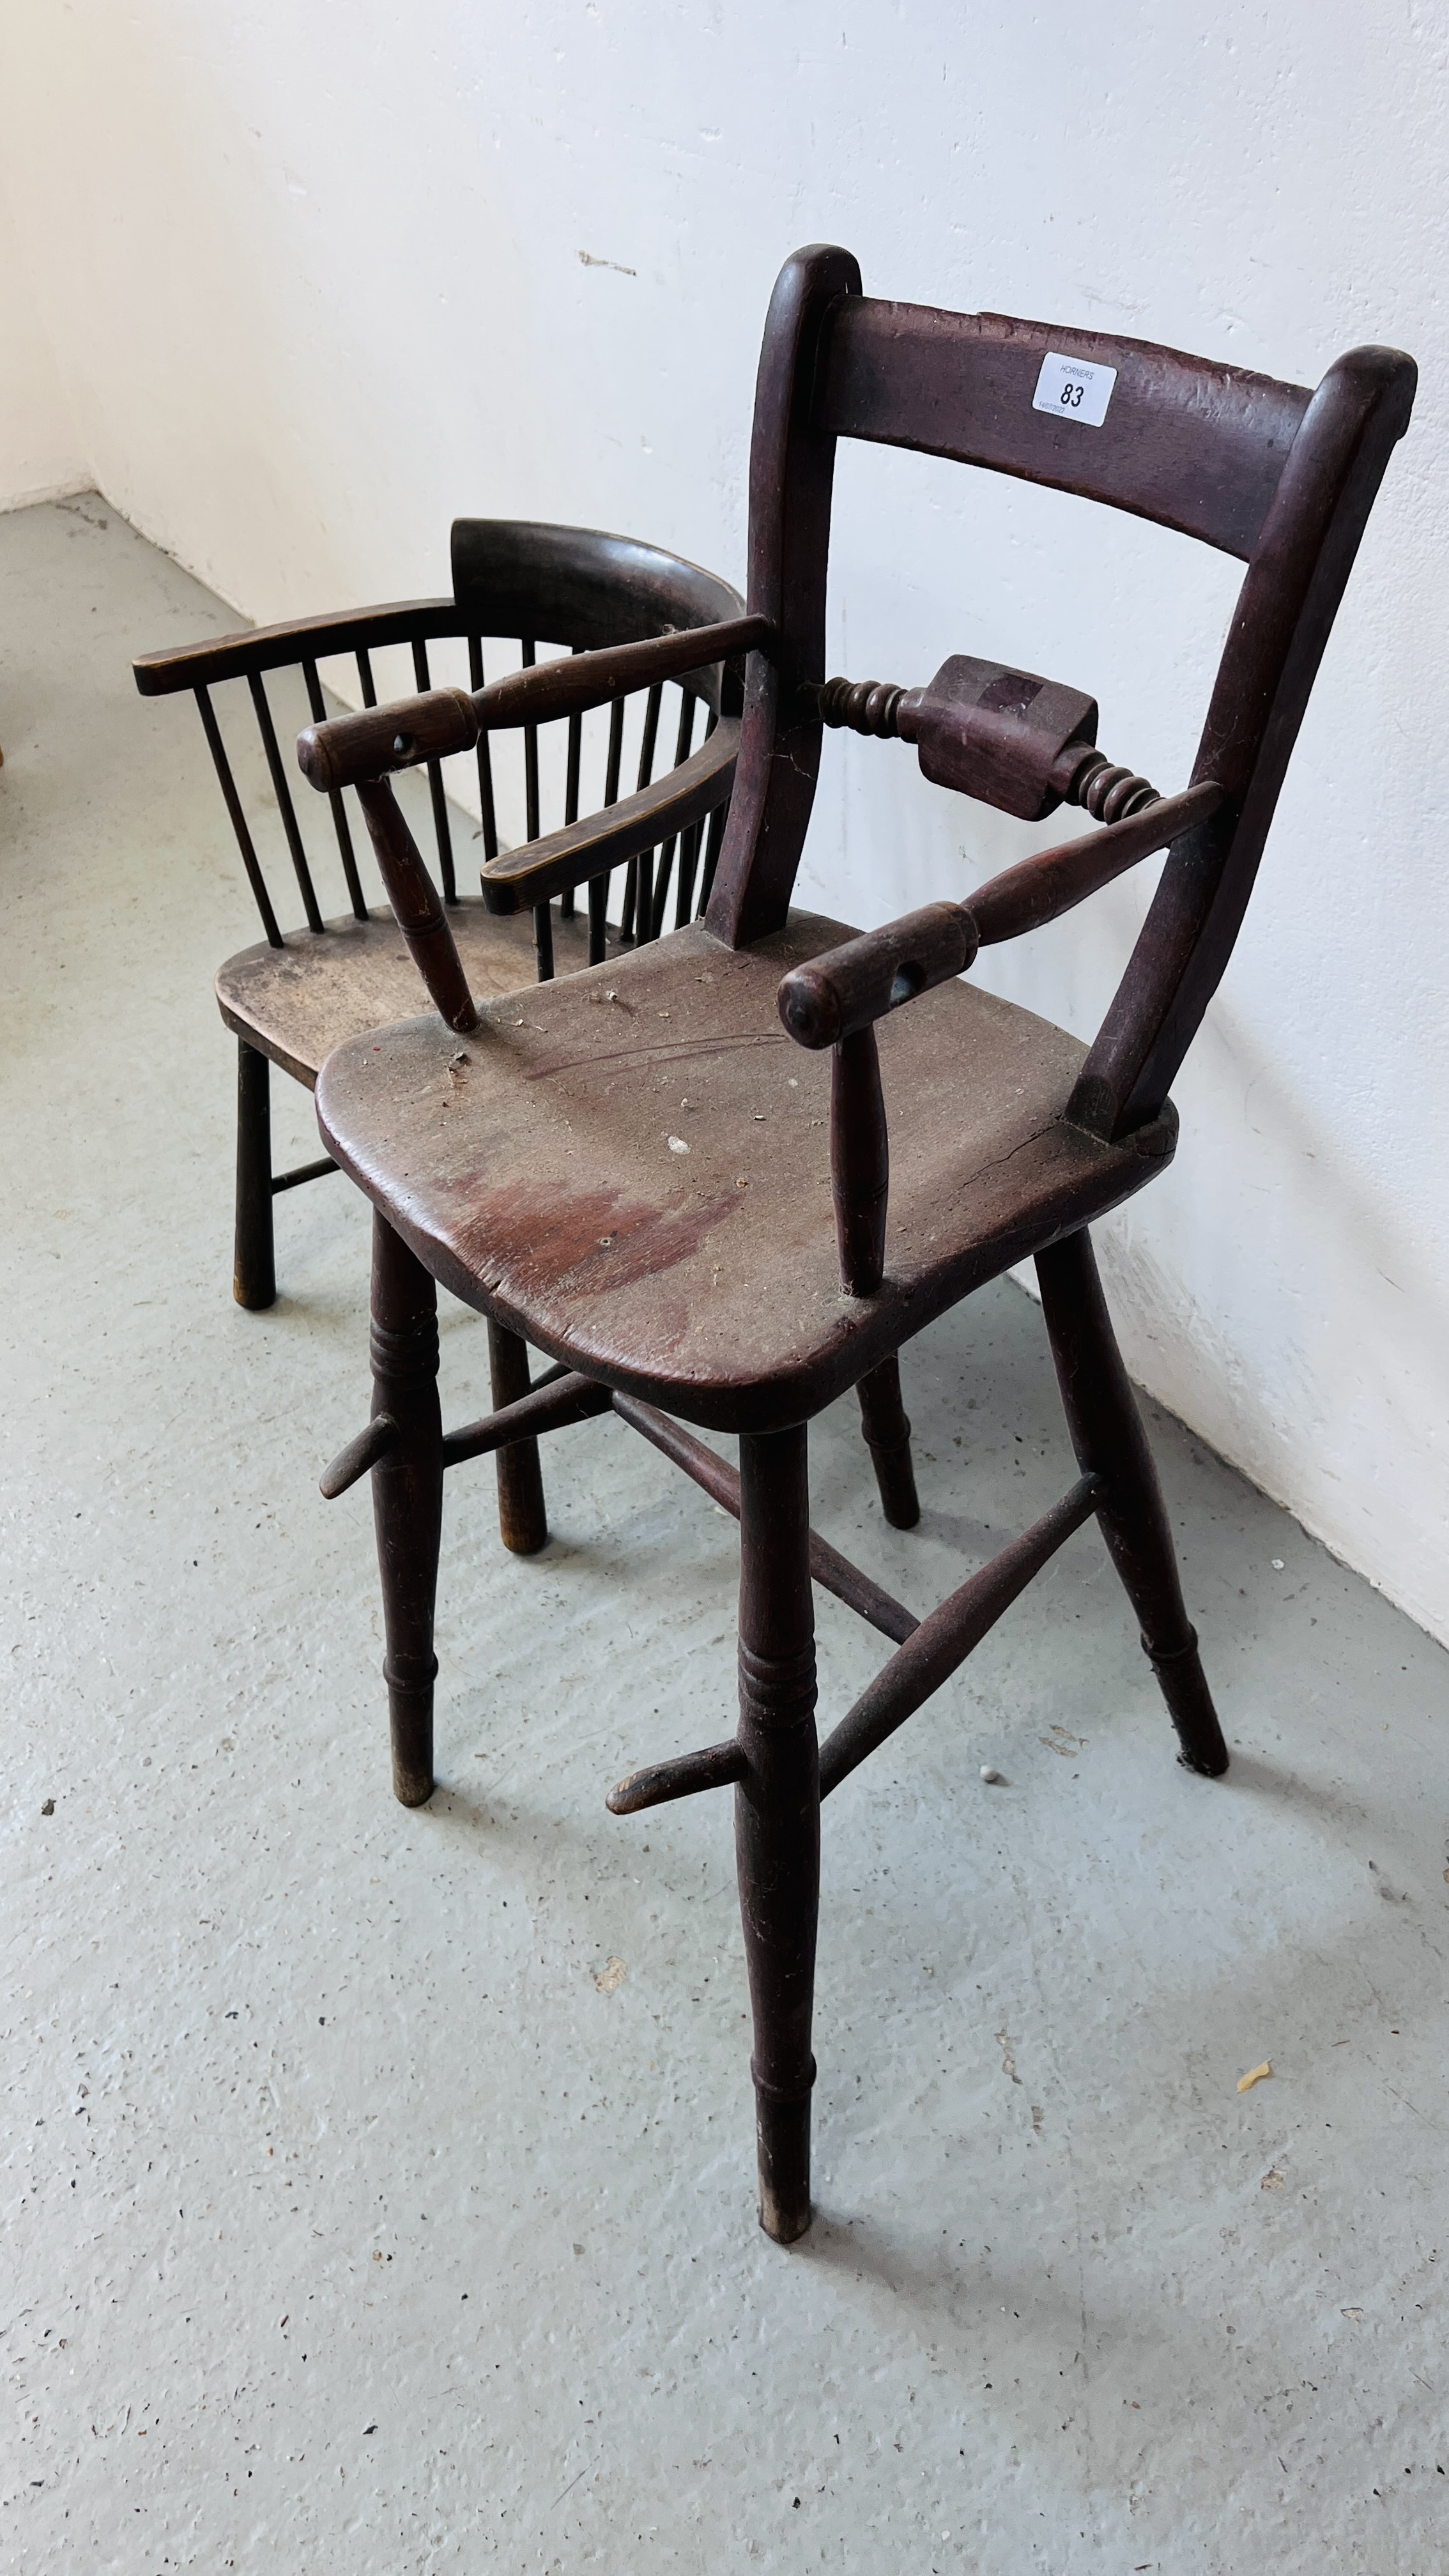 VINTAGE VICTORIAN HARDWOOD HIGHCHAIR ALONG WITH A LIBERTY STYLE CHILD'S CHAIR. - Image 8 of 8